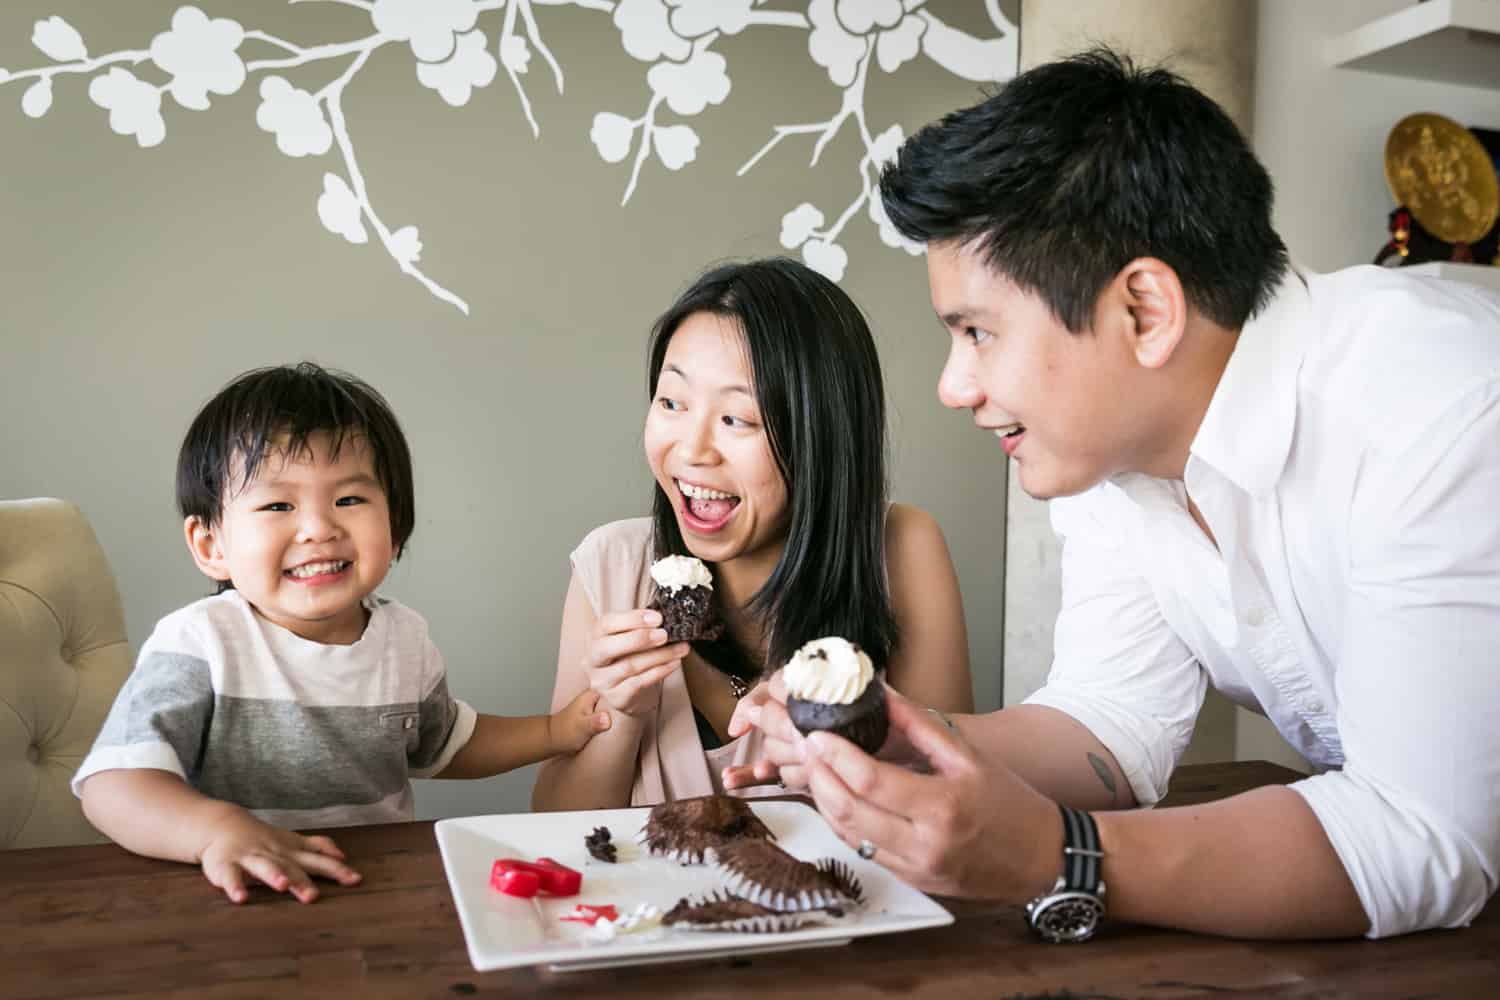 Manhattan family portrait of parents and child eating cupcakes